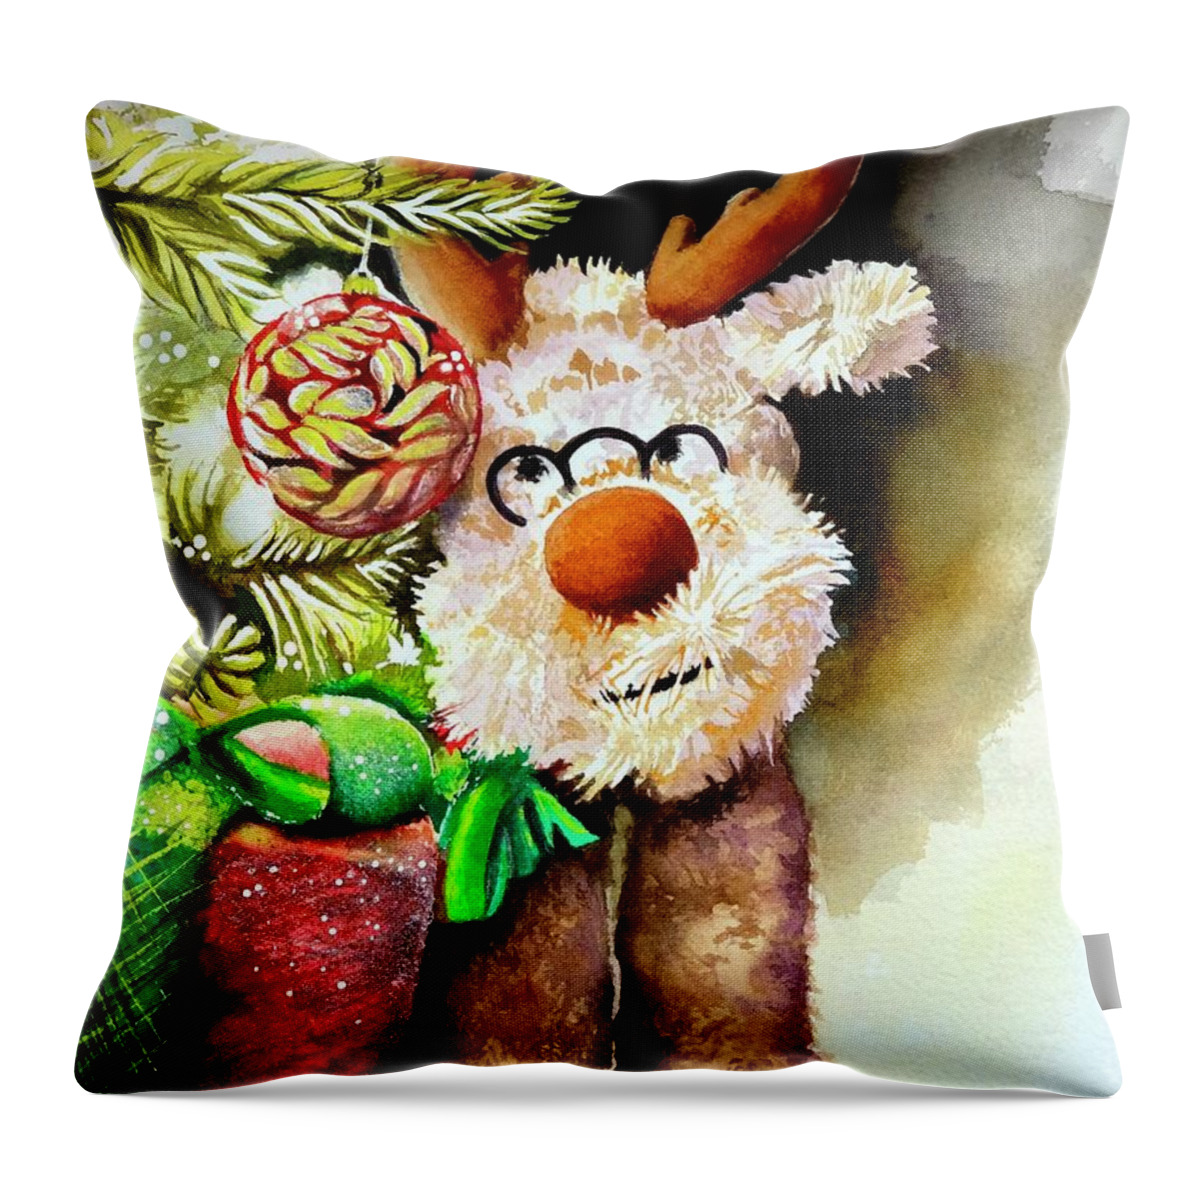 Christmas Throw Pillow featuring the painting Christmas by Jeanette Ferguson